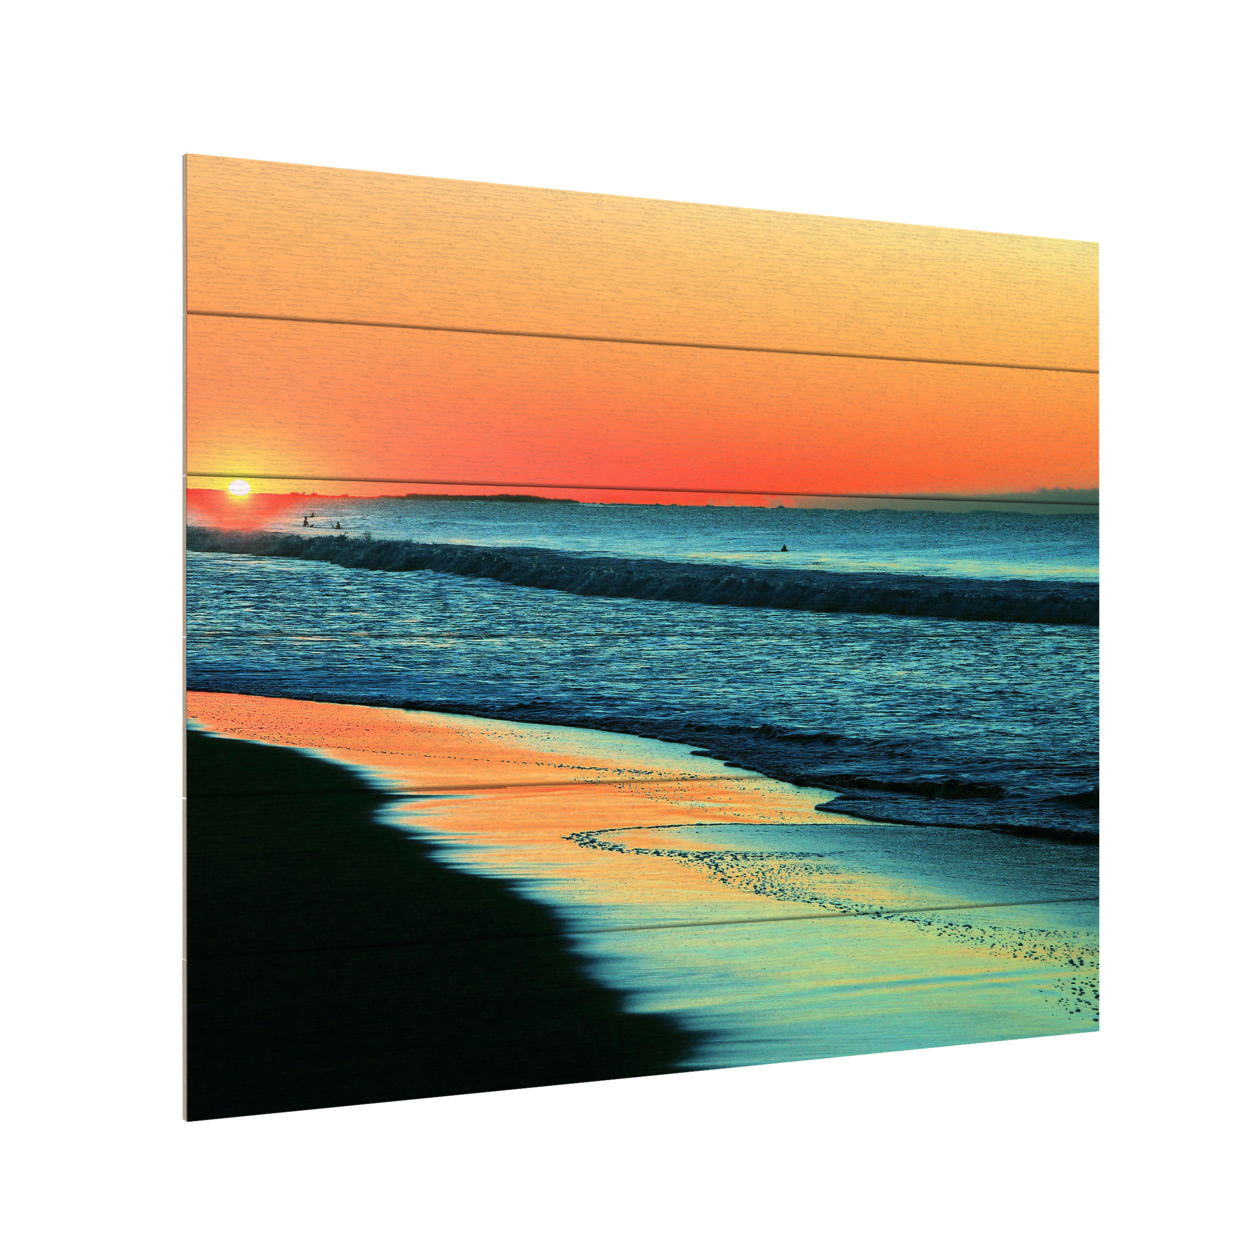 Wooden Slat Art 18 X 22 Inches Titled Good Morning Sunshine Ready To Hang Home Decor Picture